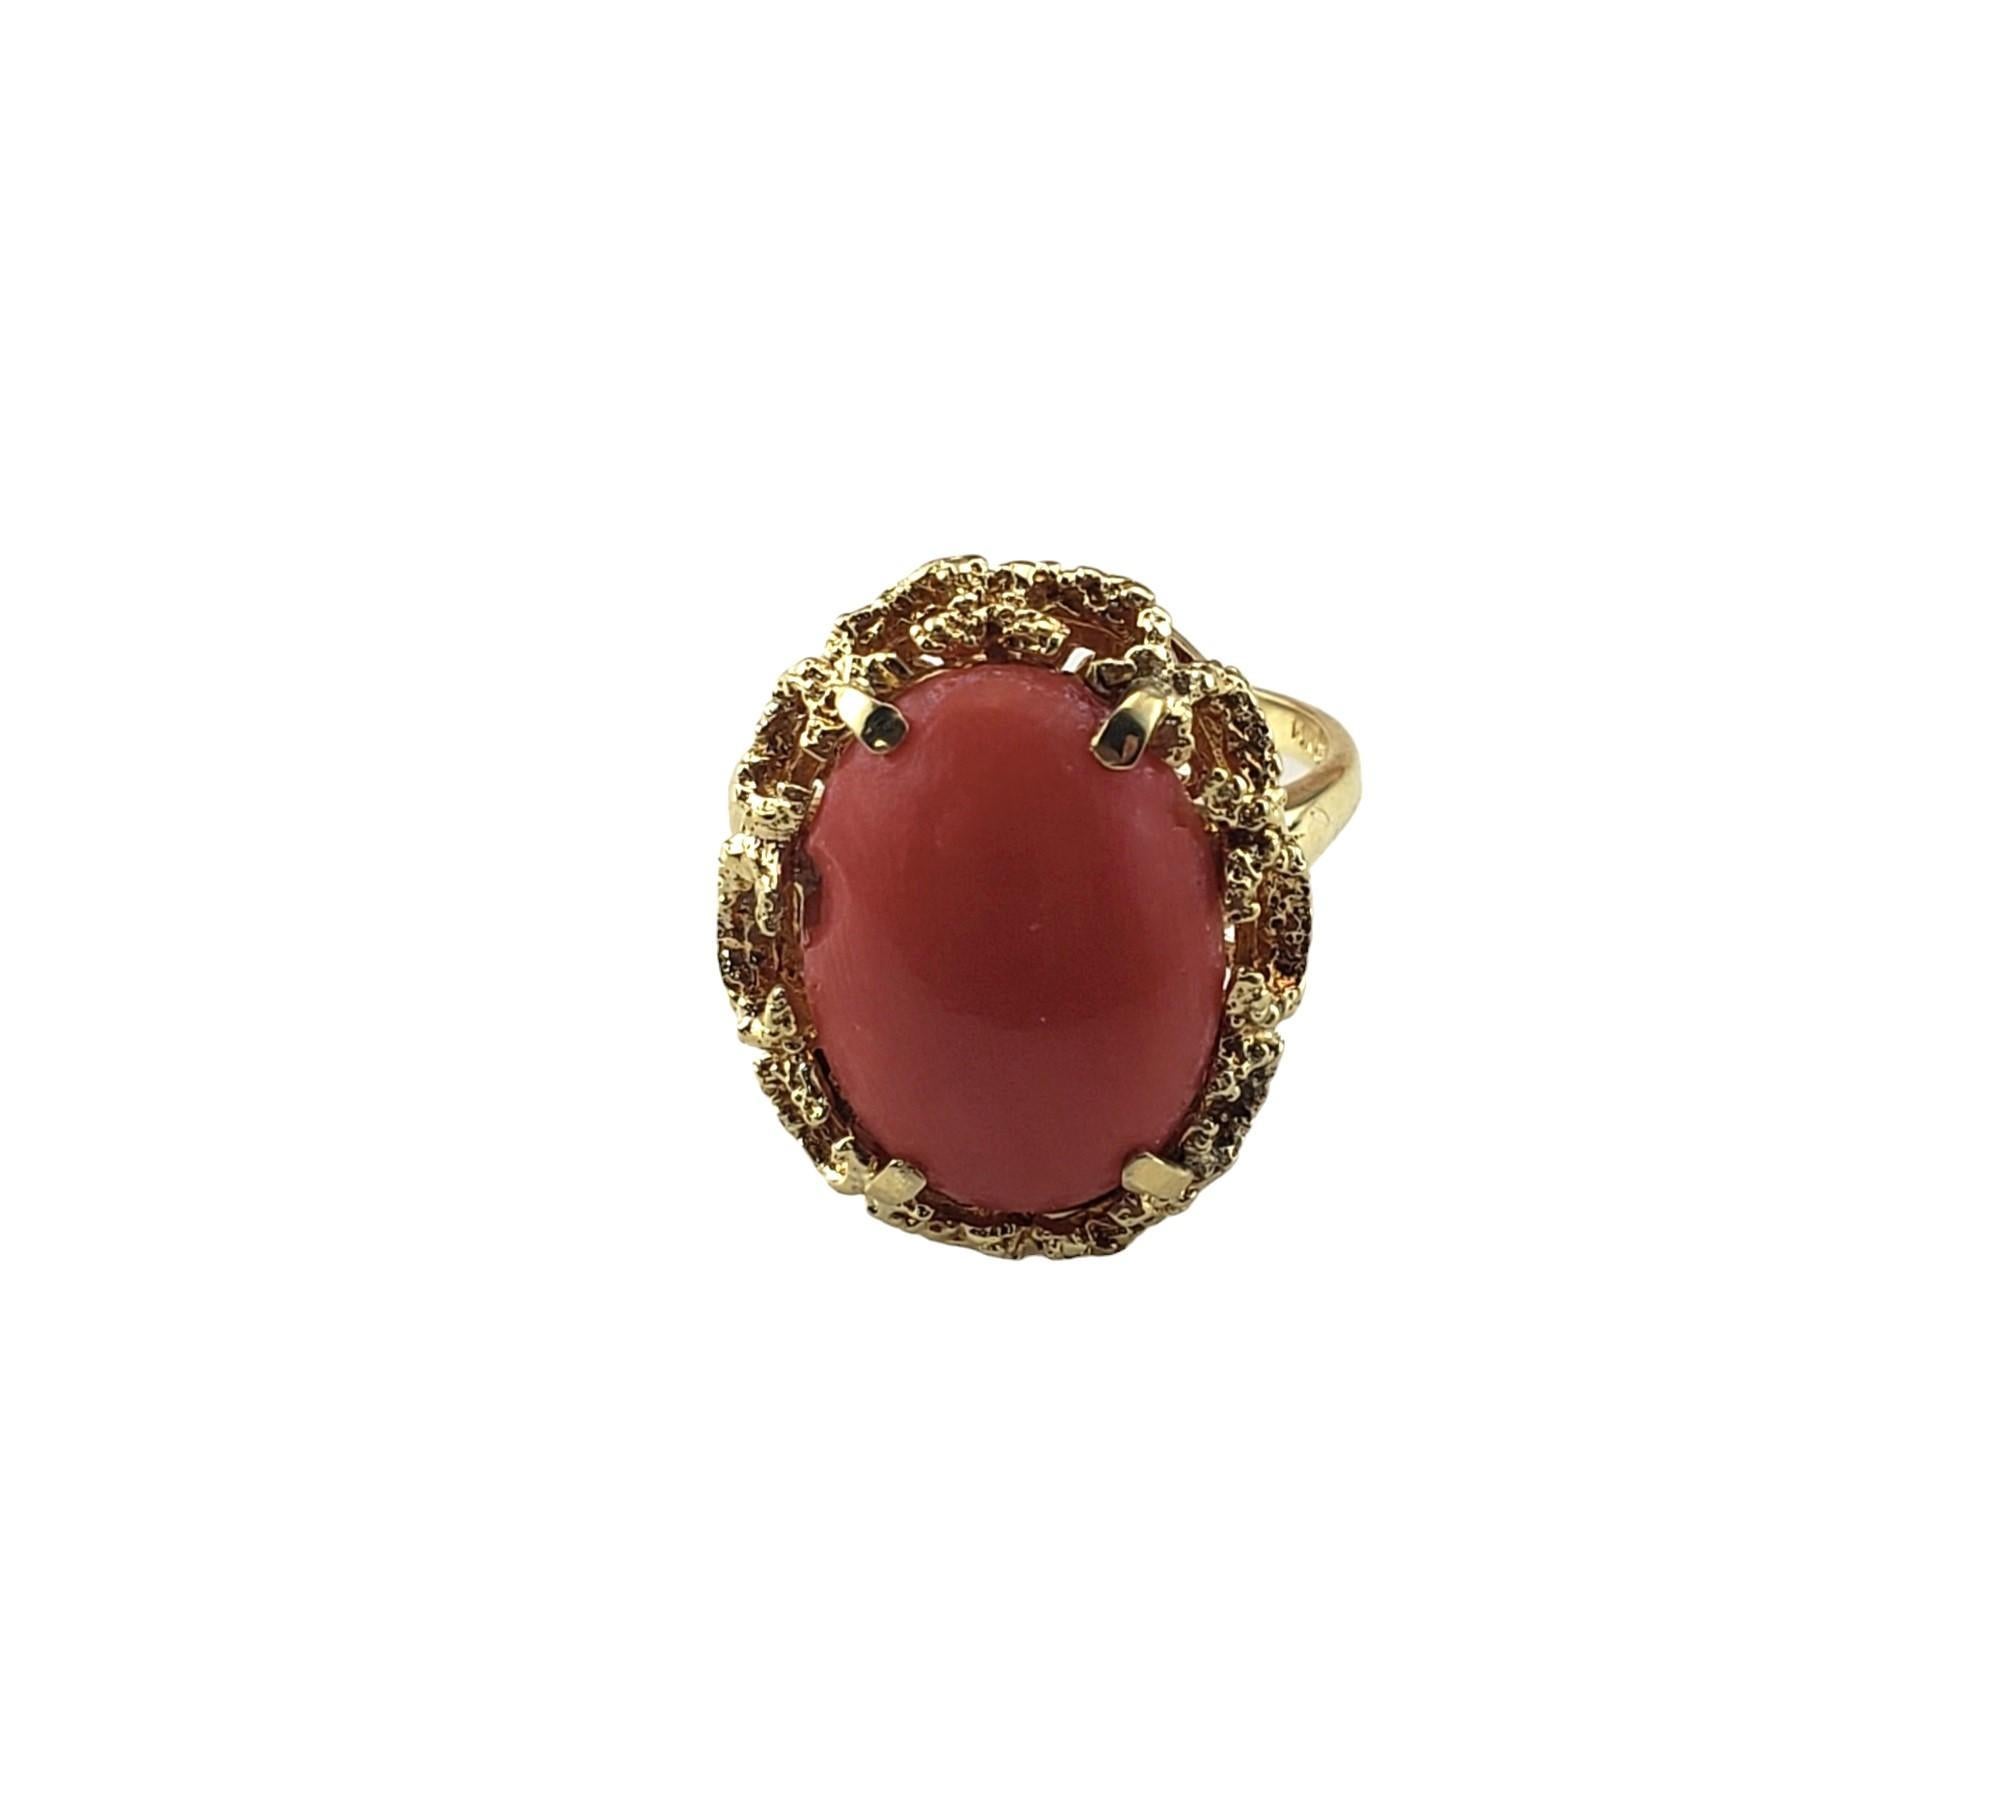 14 Karat Yellow Gold Coral Ring Size 7.25

This stunning ring features one oval coral stone set in beautifully detailed 14K yellow gold.  

Top of ring measures 21 mm x 17 mm.  Shank: 1.5 mm.

Ring Size: 7.25

Stamped: 14K GAJ

Weight: 4.3 dwt./ 6.7